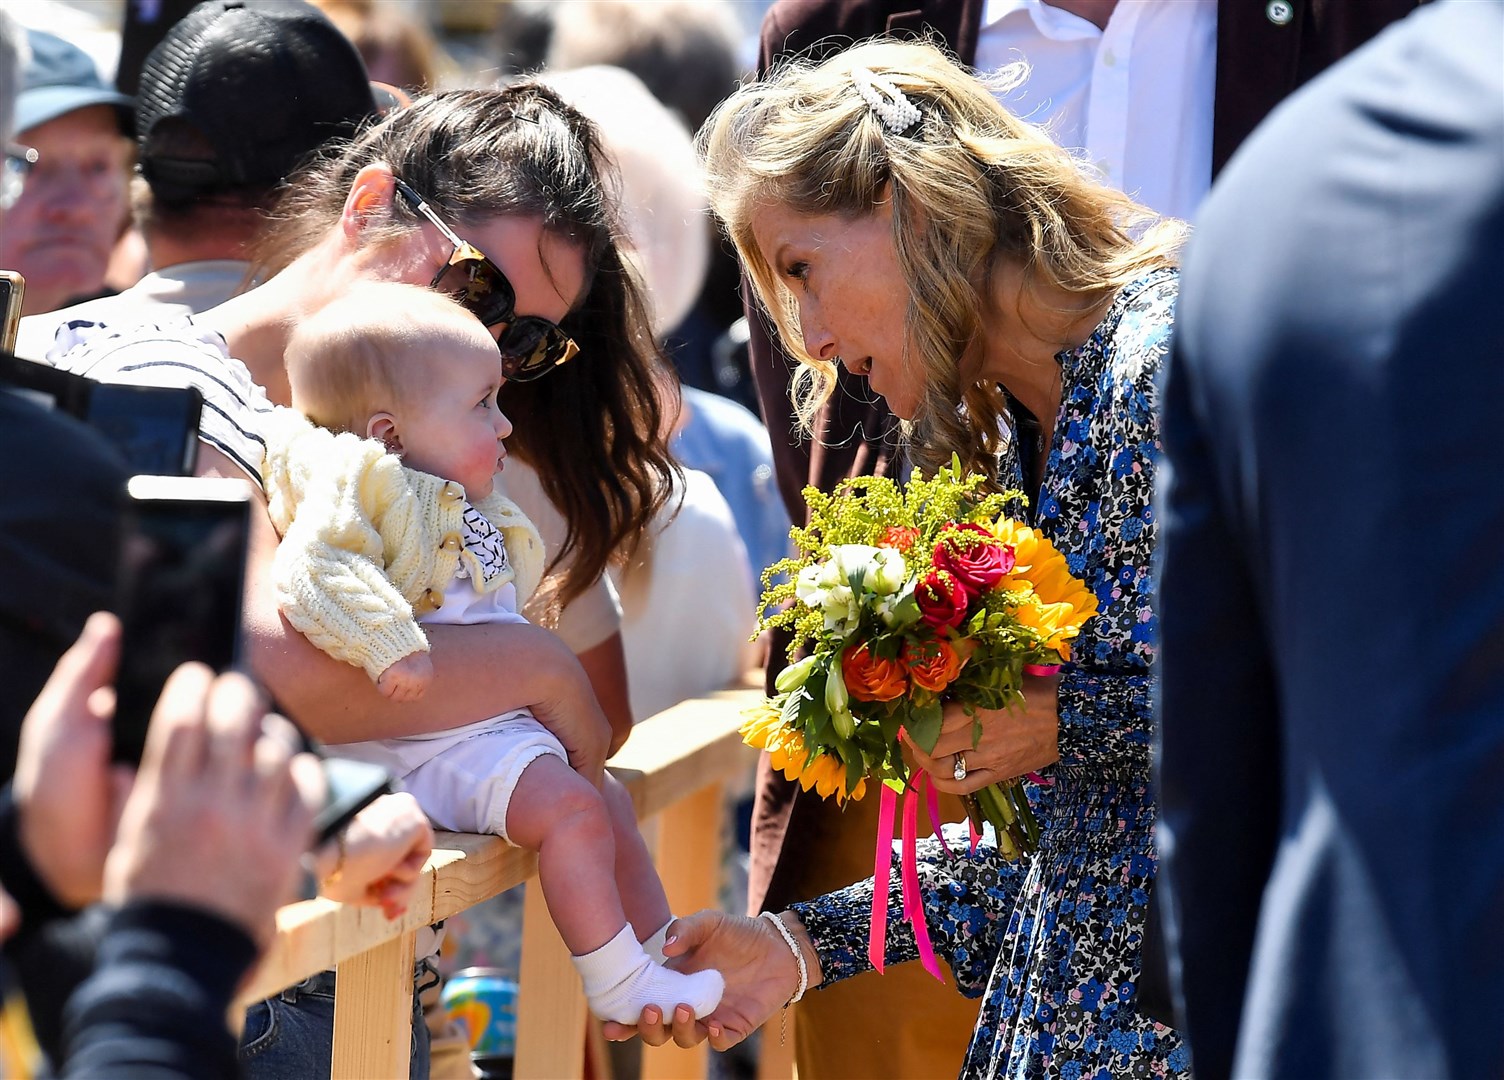 They also visited Bangor, where Sophie met a very young royal fan (Clodagh Kilcoyne/PA)